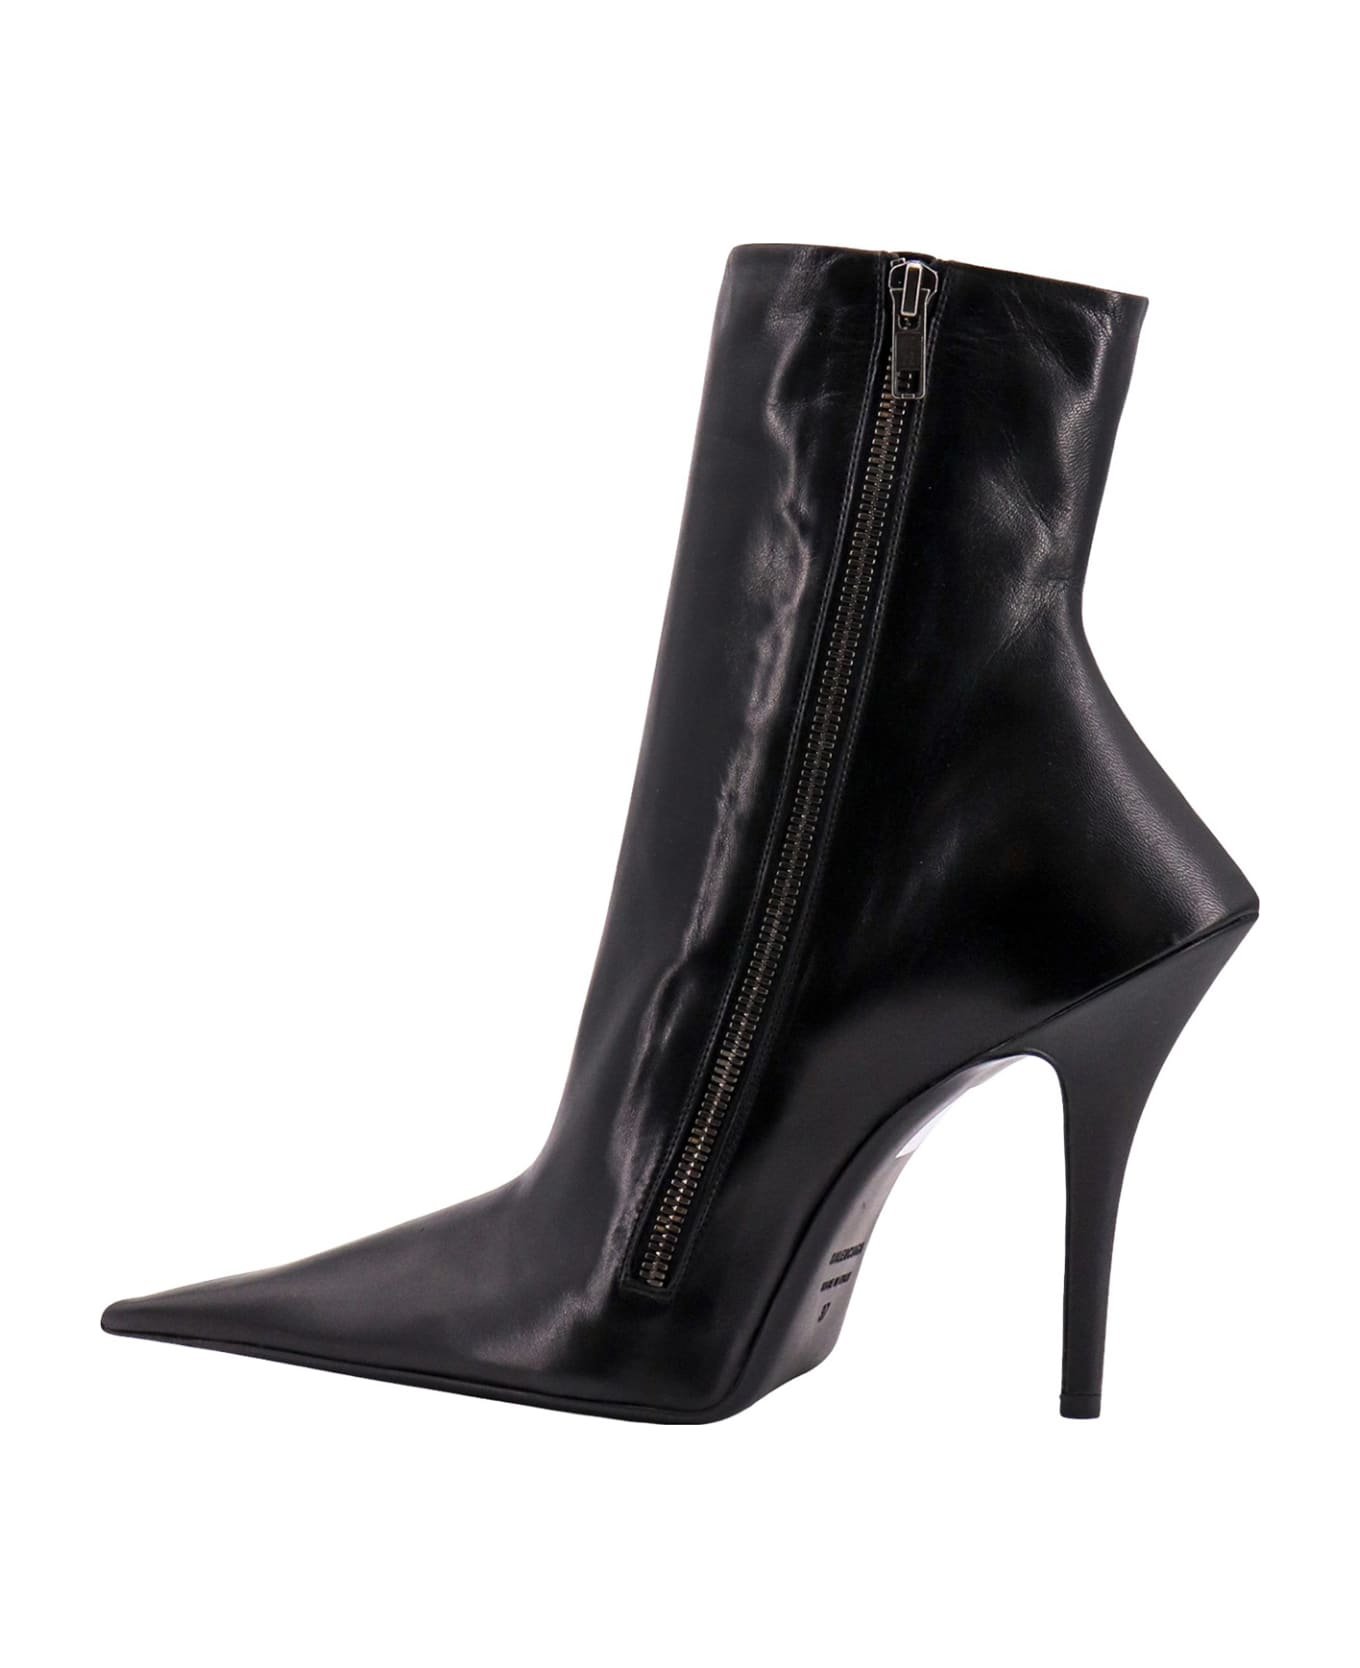 Balenciaga Witch Ankle Boots - Black ブーツ